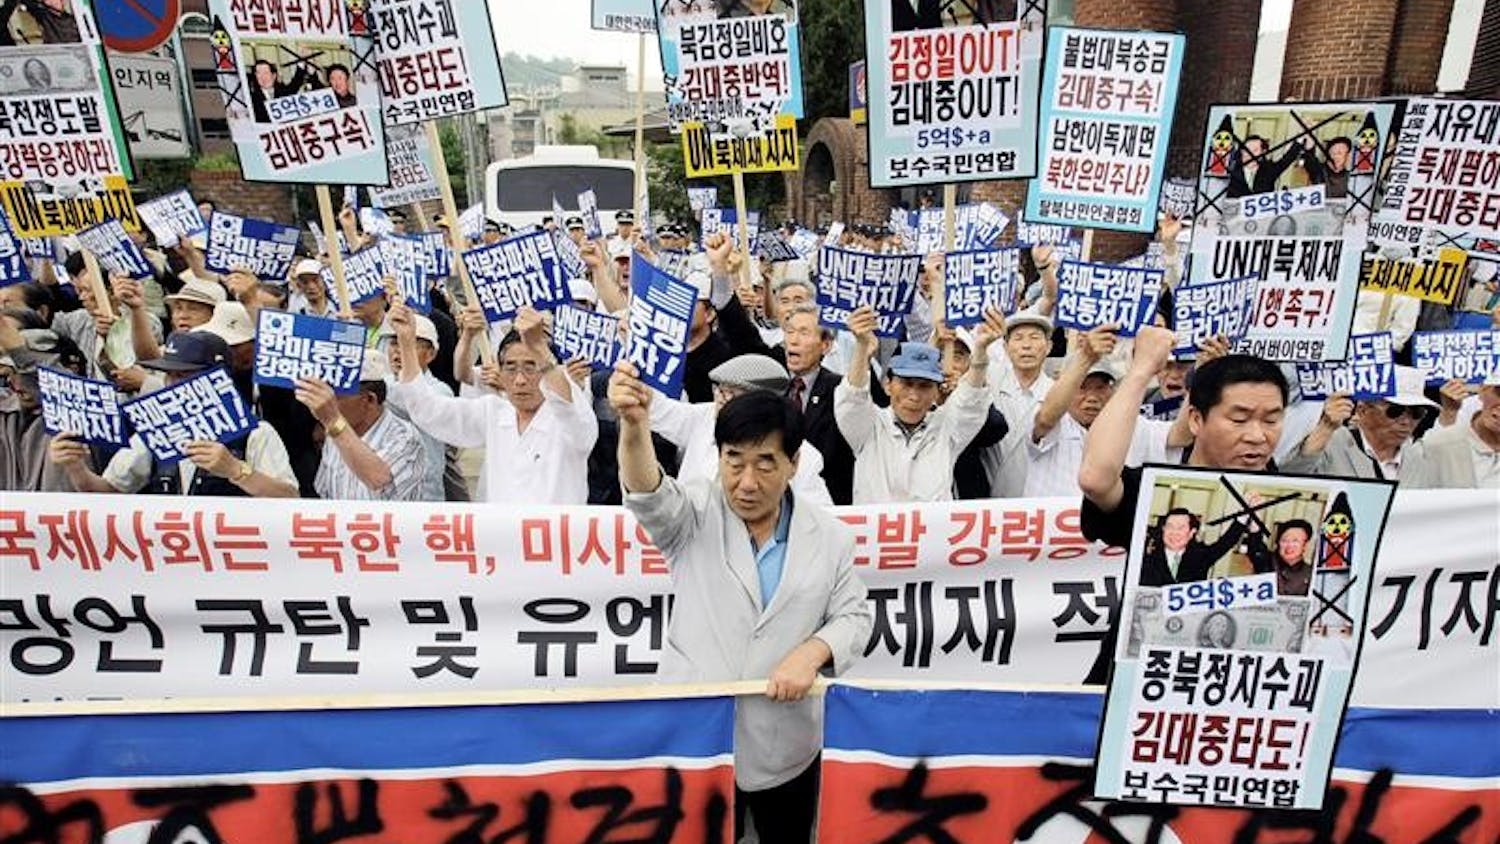 South Korean protesters shout slogans during a rally against North Korea's nuclear program while denouncing the ninth anniversary of the June 2000 summit between the South Korean President Kim Dae-jung and North Korean leader Kim Jong Il, in front of the former South President Kim's house in Seoul, South Korea, Sunday, June 14, 2009. North Korea's communist regime has warned of a nuclear war on the Korean peninsula while vowing to step up its atomic bomb-making program in defiance of new U.N. sanctions. The Korean read "'Annihilate North Korea at the start of war and Support U.N. sanctions." 